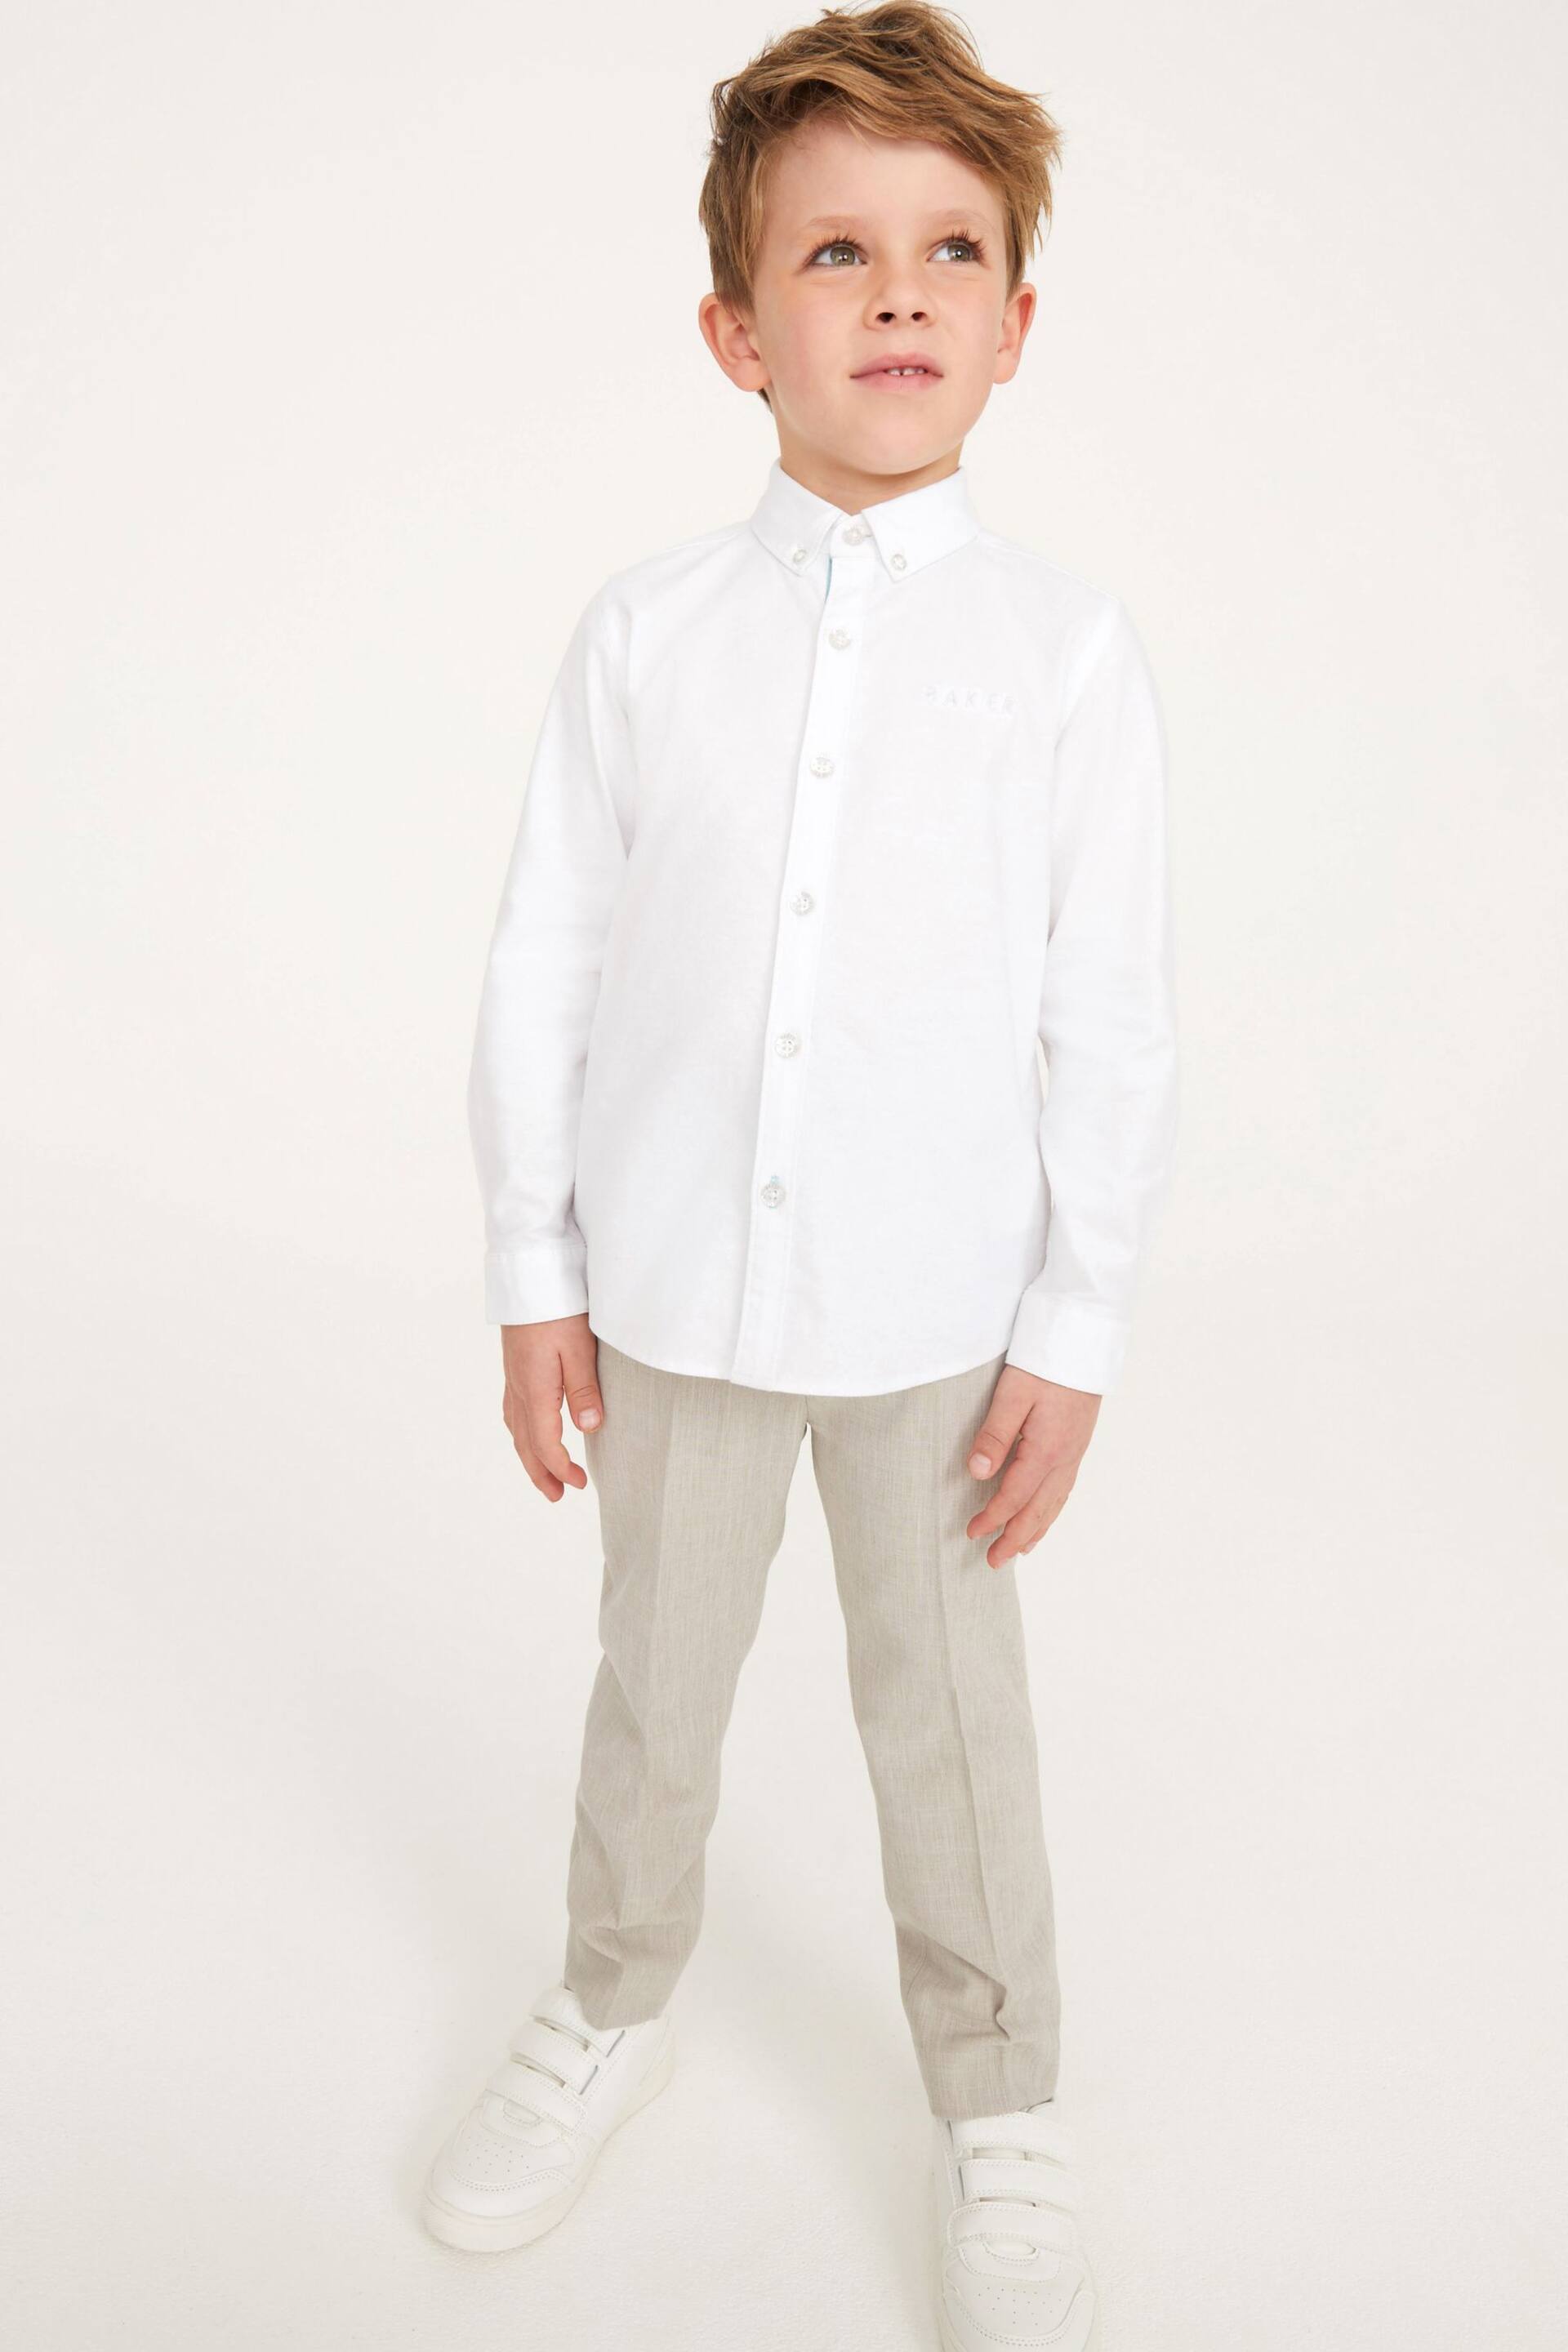 Baker by Ted Baker Oxford Shirt - Image 2 of 7